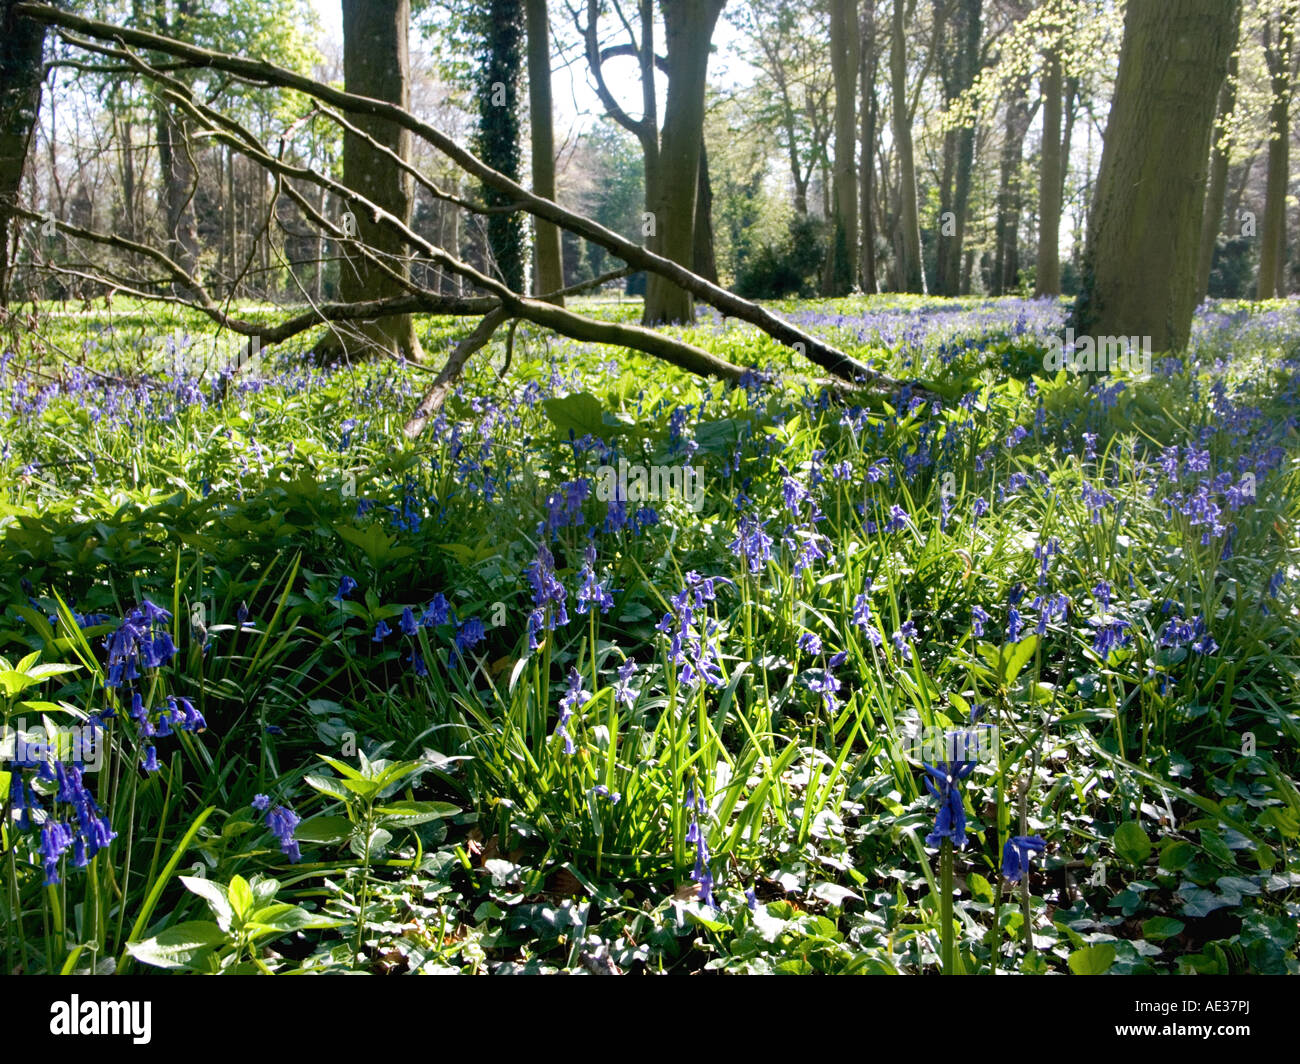 Bluebells in an English wood Stock Photo